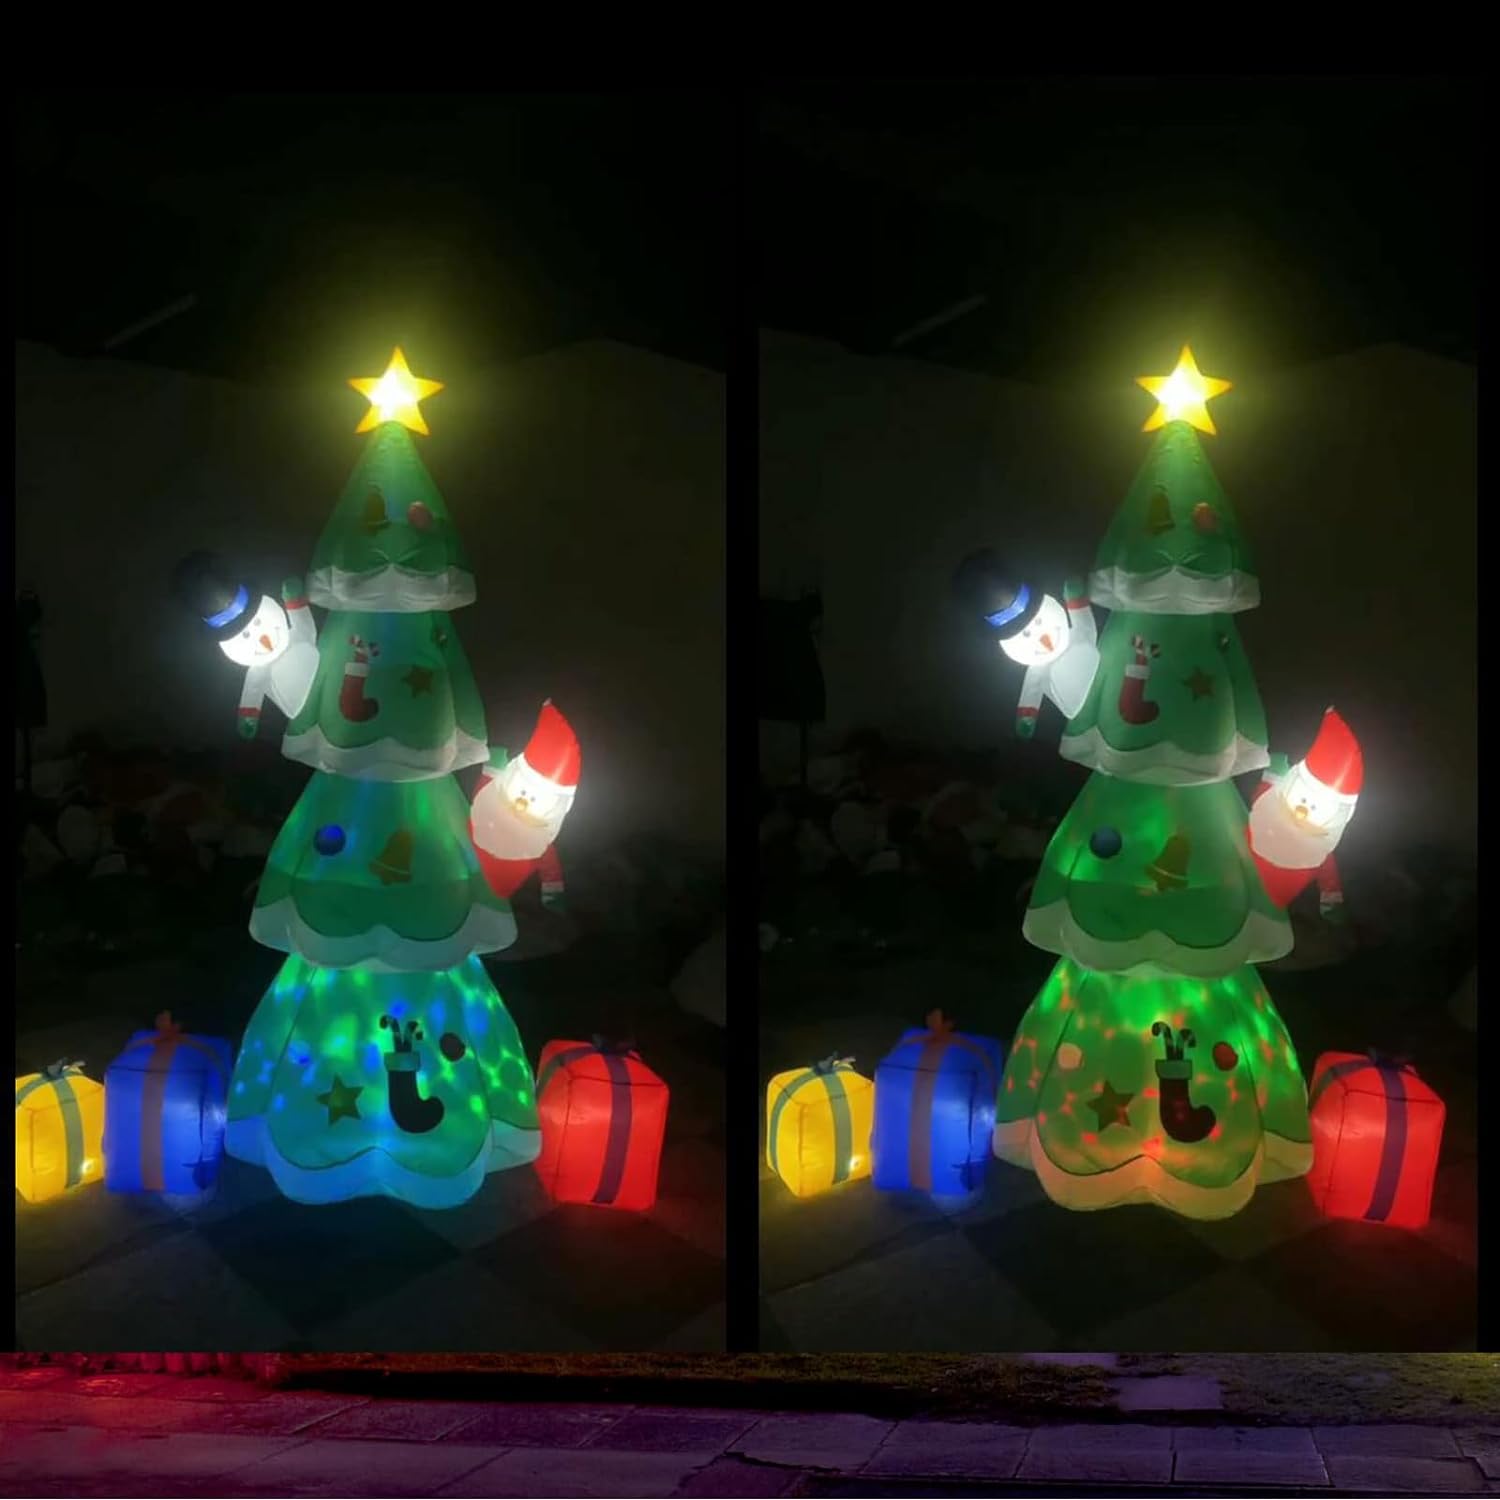 7 Ft Inflatables Christmas Tree with Color Changing LED Lights Decorations, Christmas Party Decor for Indoor Outdoor Yard,Green